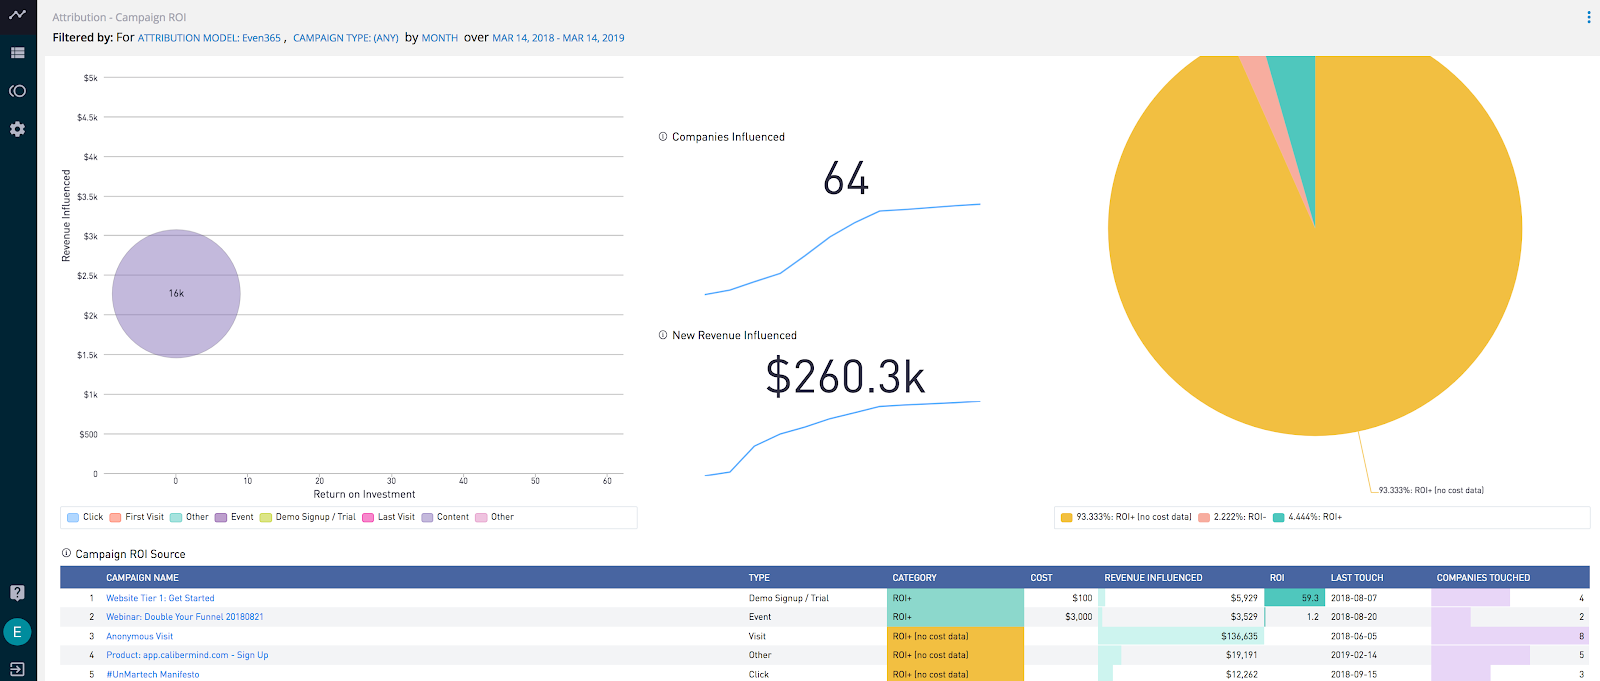 CaliberMind lets you review ROI for any campaign via the Campaign ROI feature